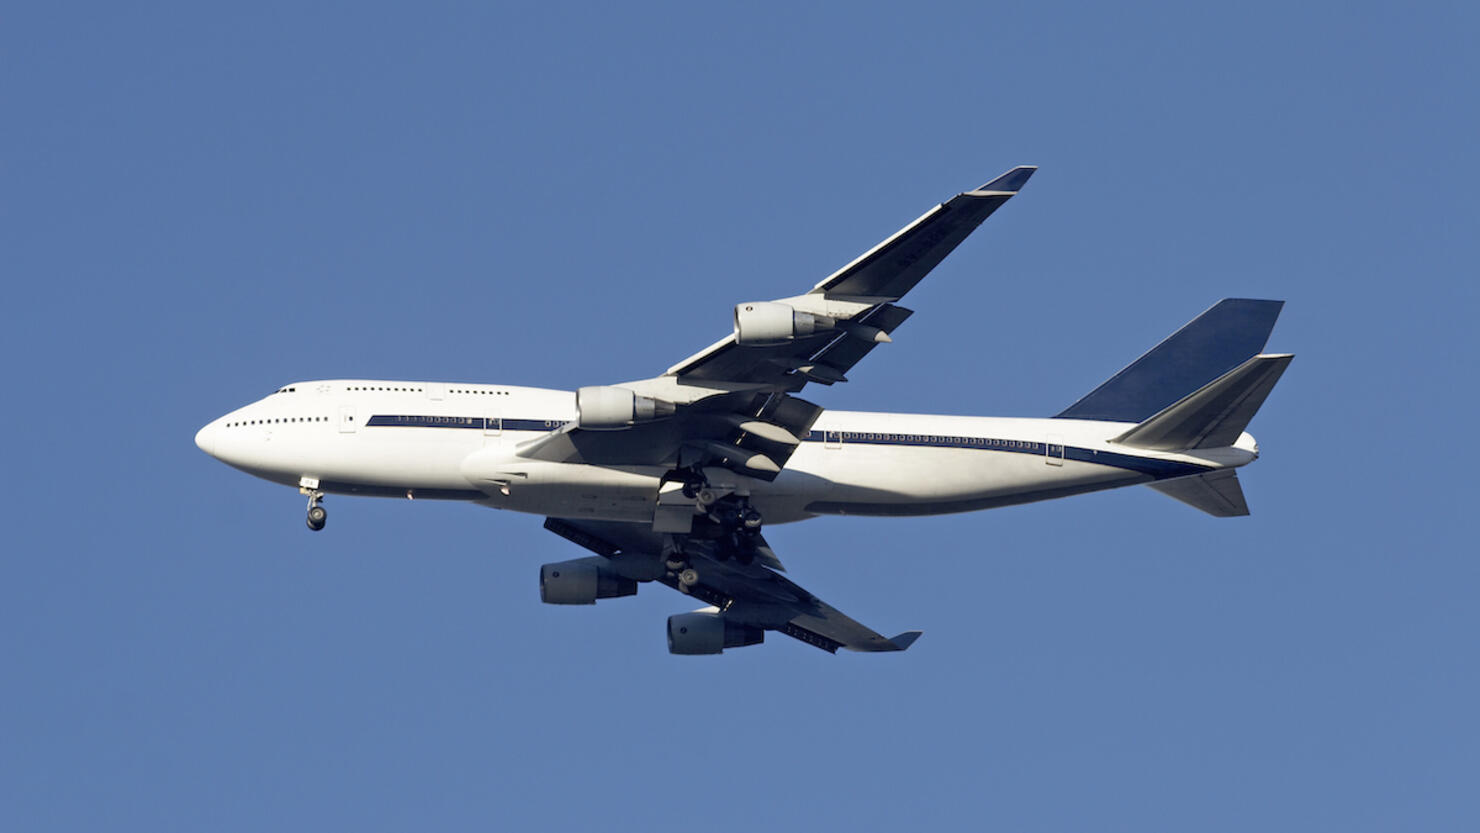 Boeing 747 Jumbo Jet in air, side view, low angle